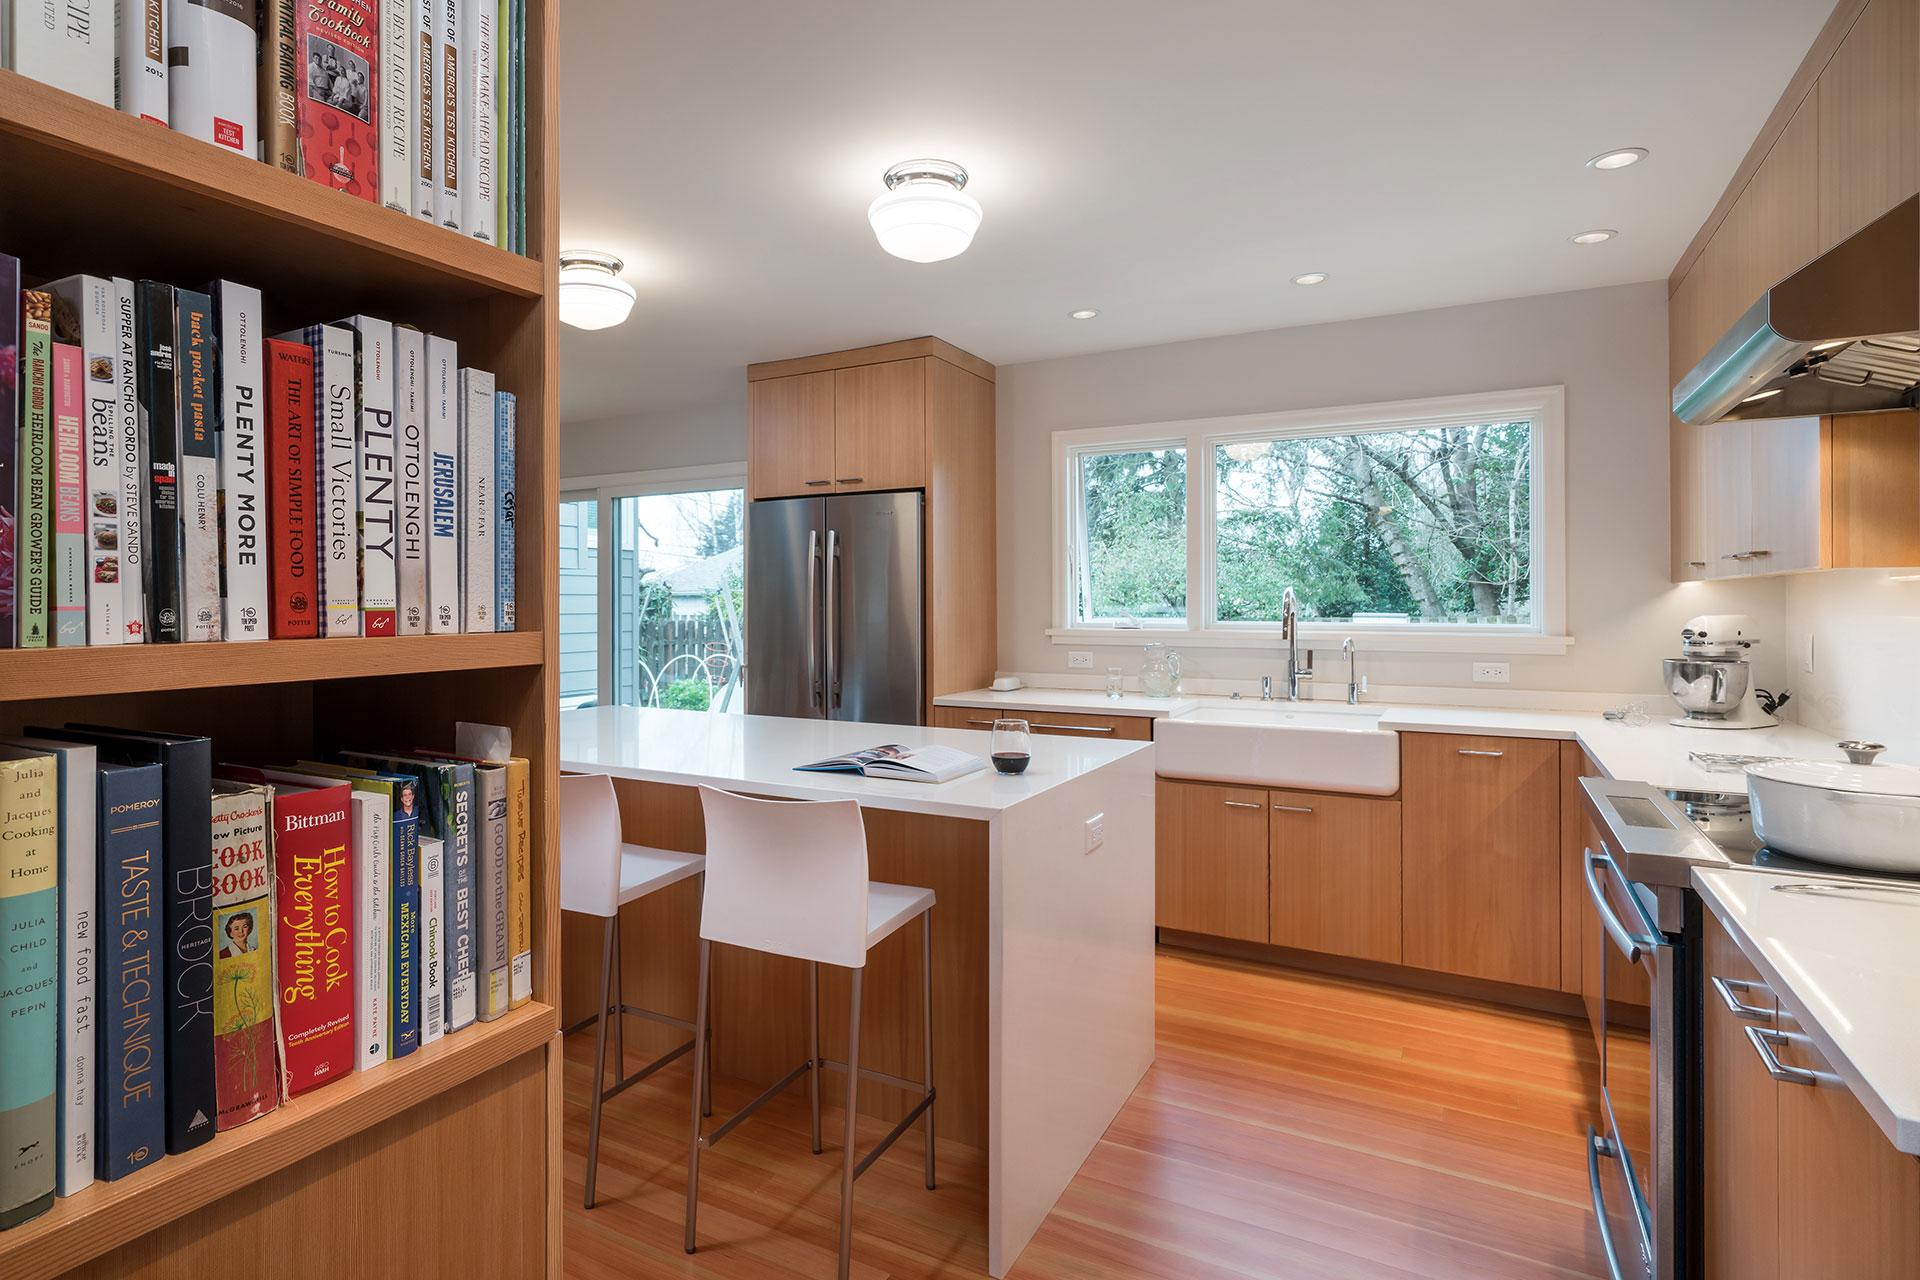 Bookshelves are built into the ends of the cabinetry in this kitchen remodel.